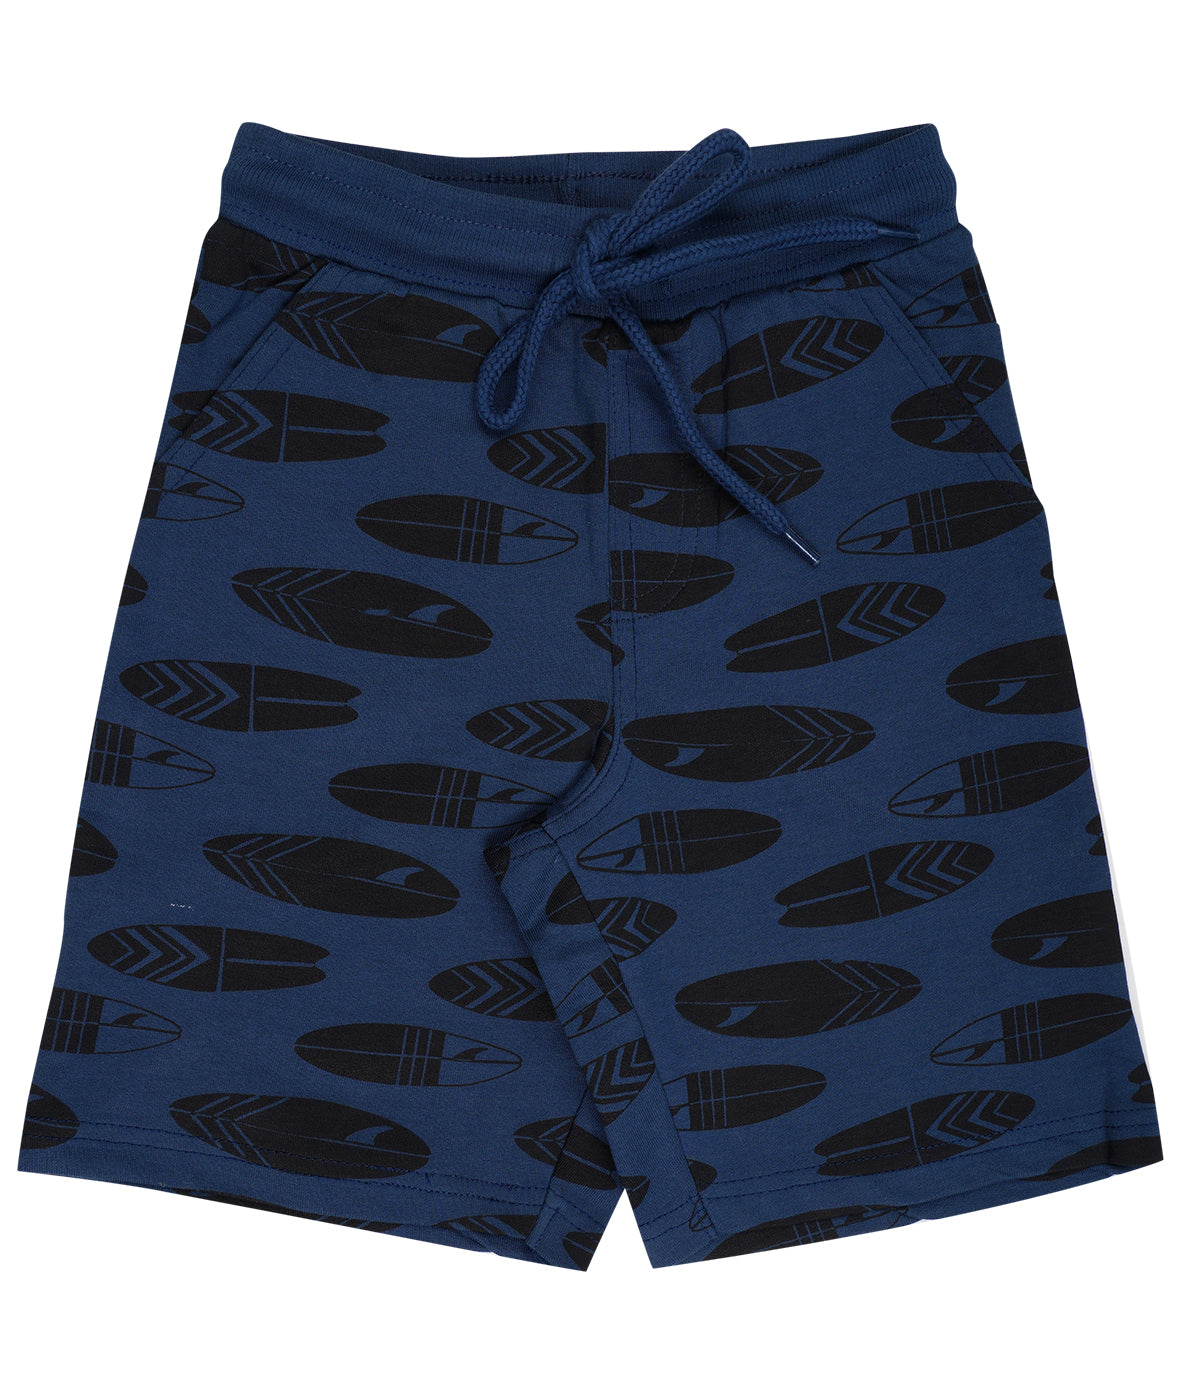 Yalzz Short For Boys Casual Printed Pure Cotton Navy Pack of 1